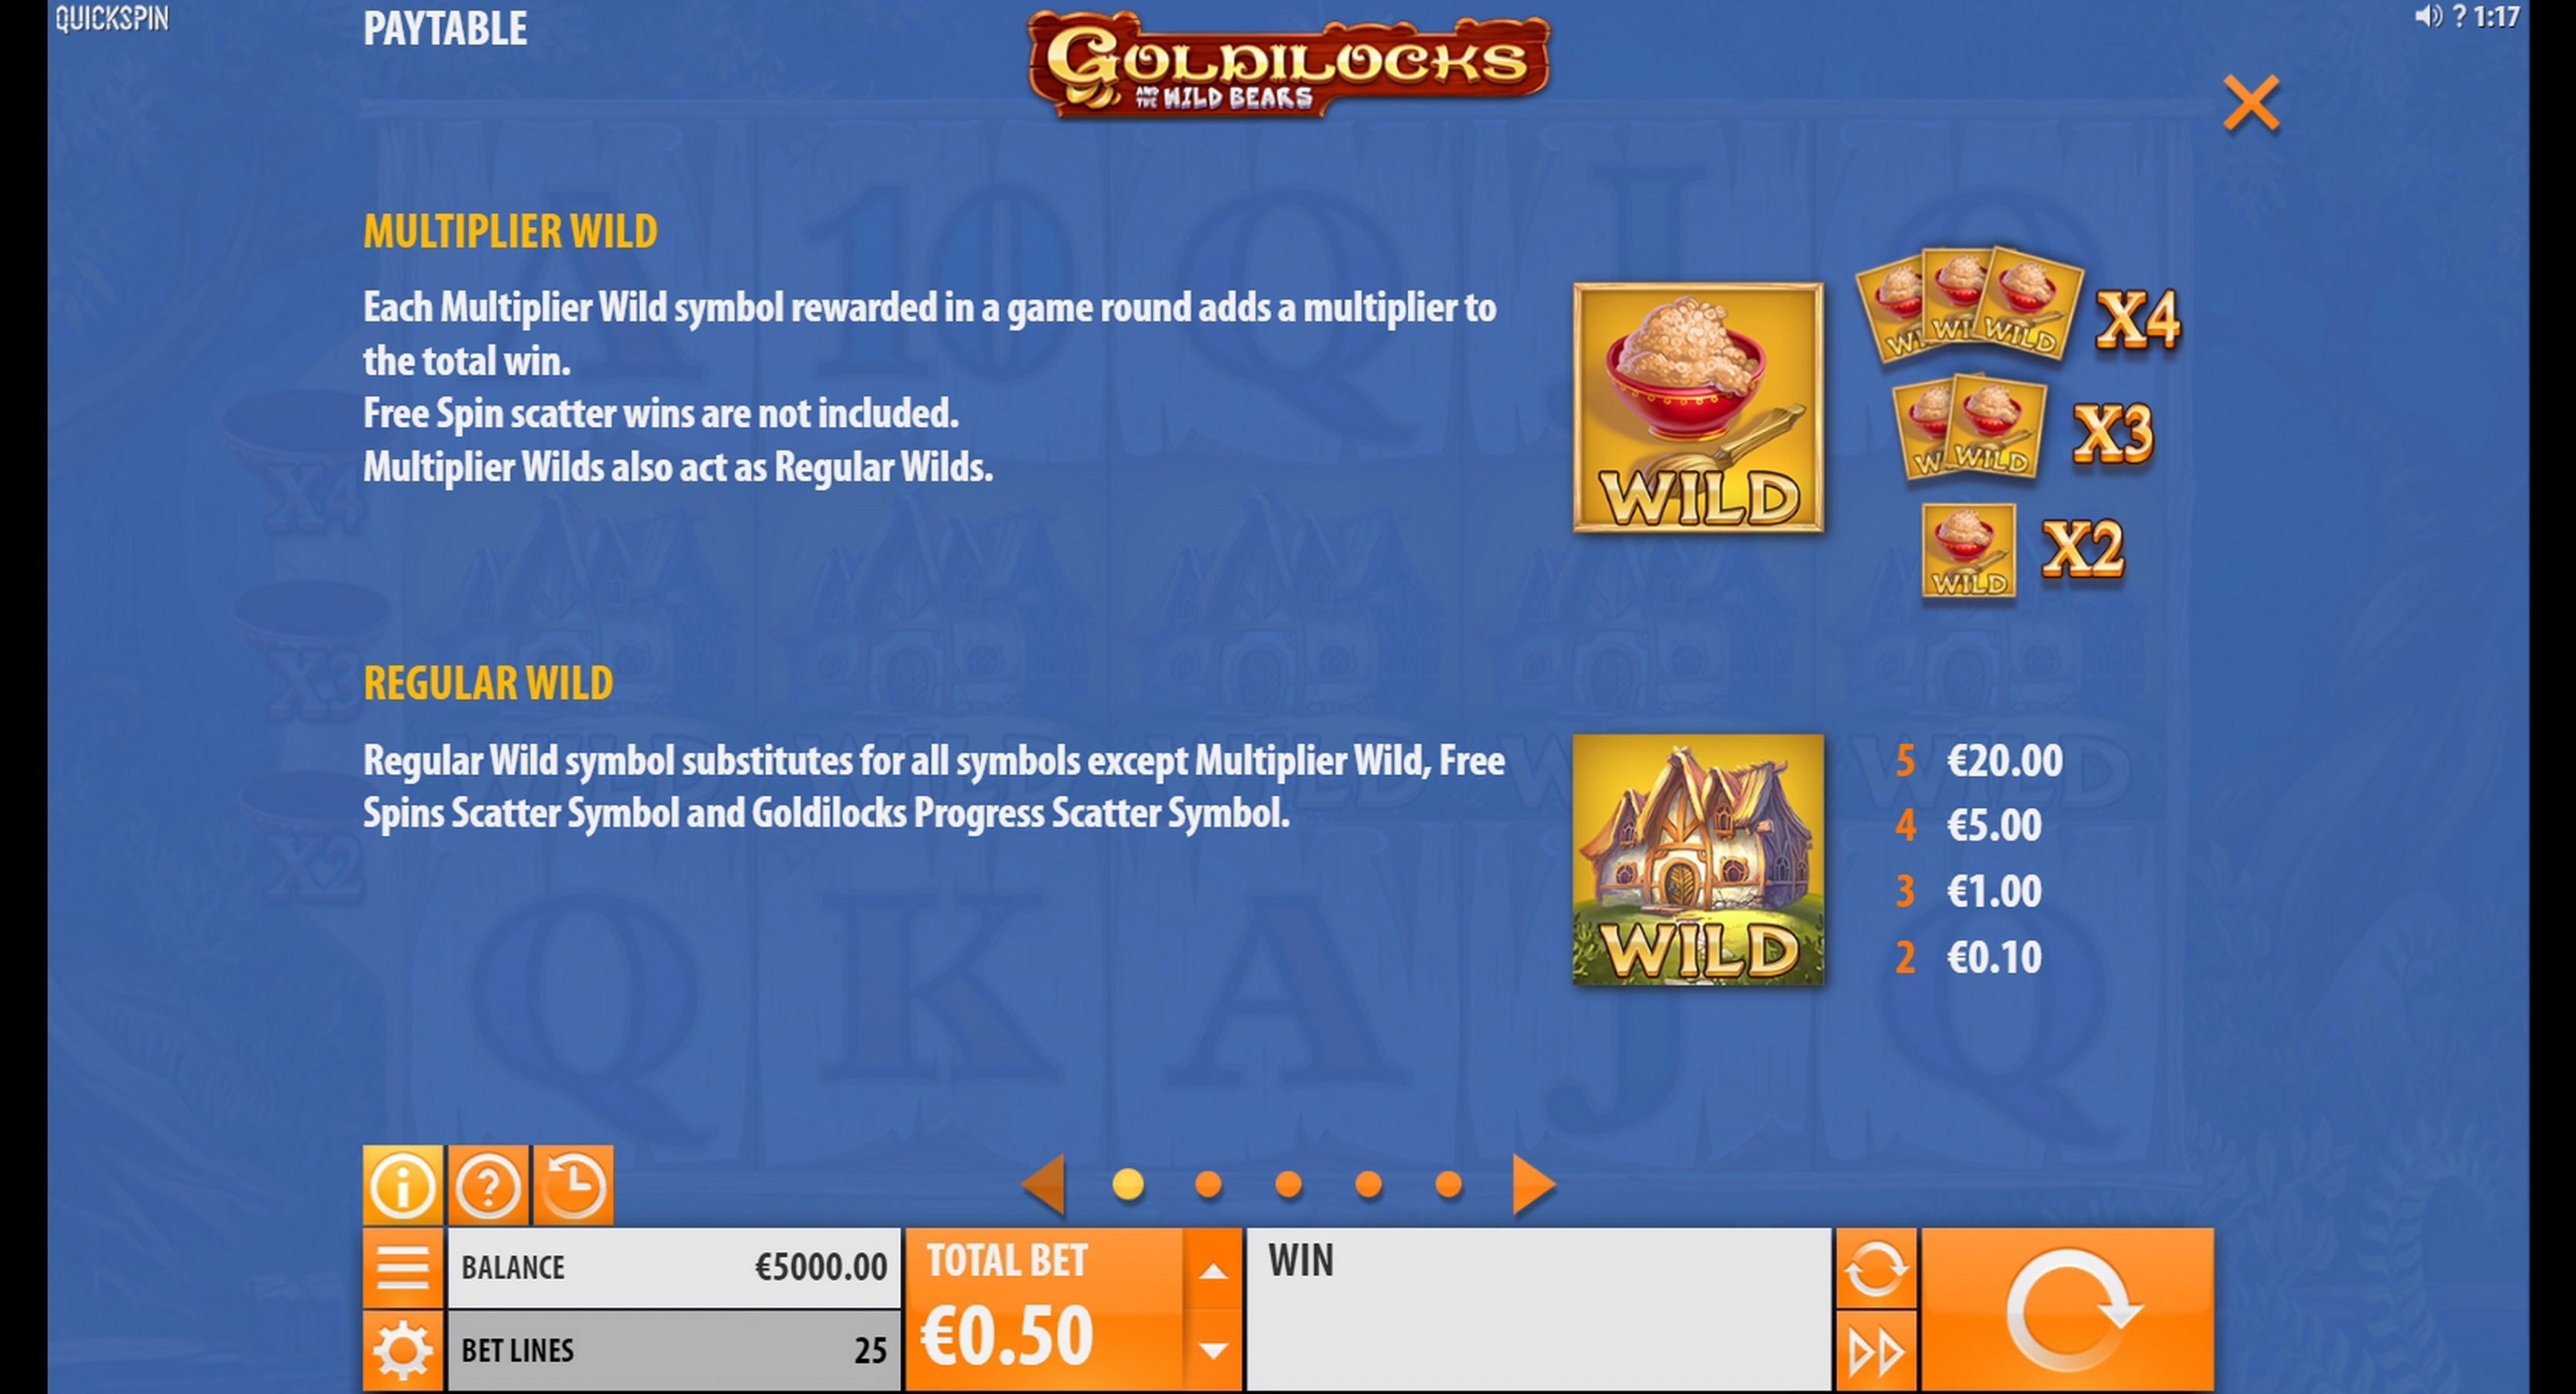 Info of Goldilocks Slot Game by Quickspin